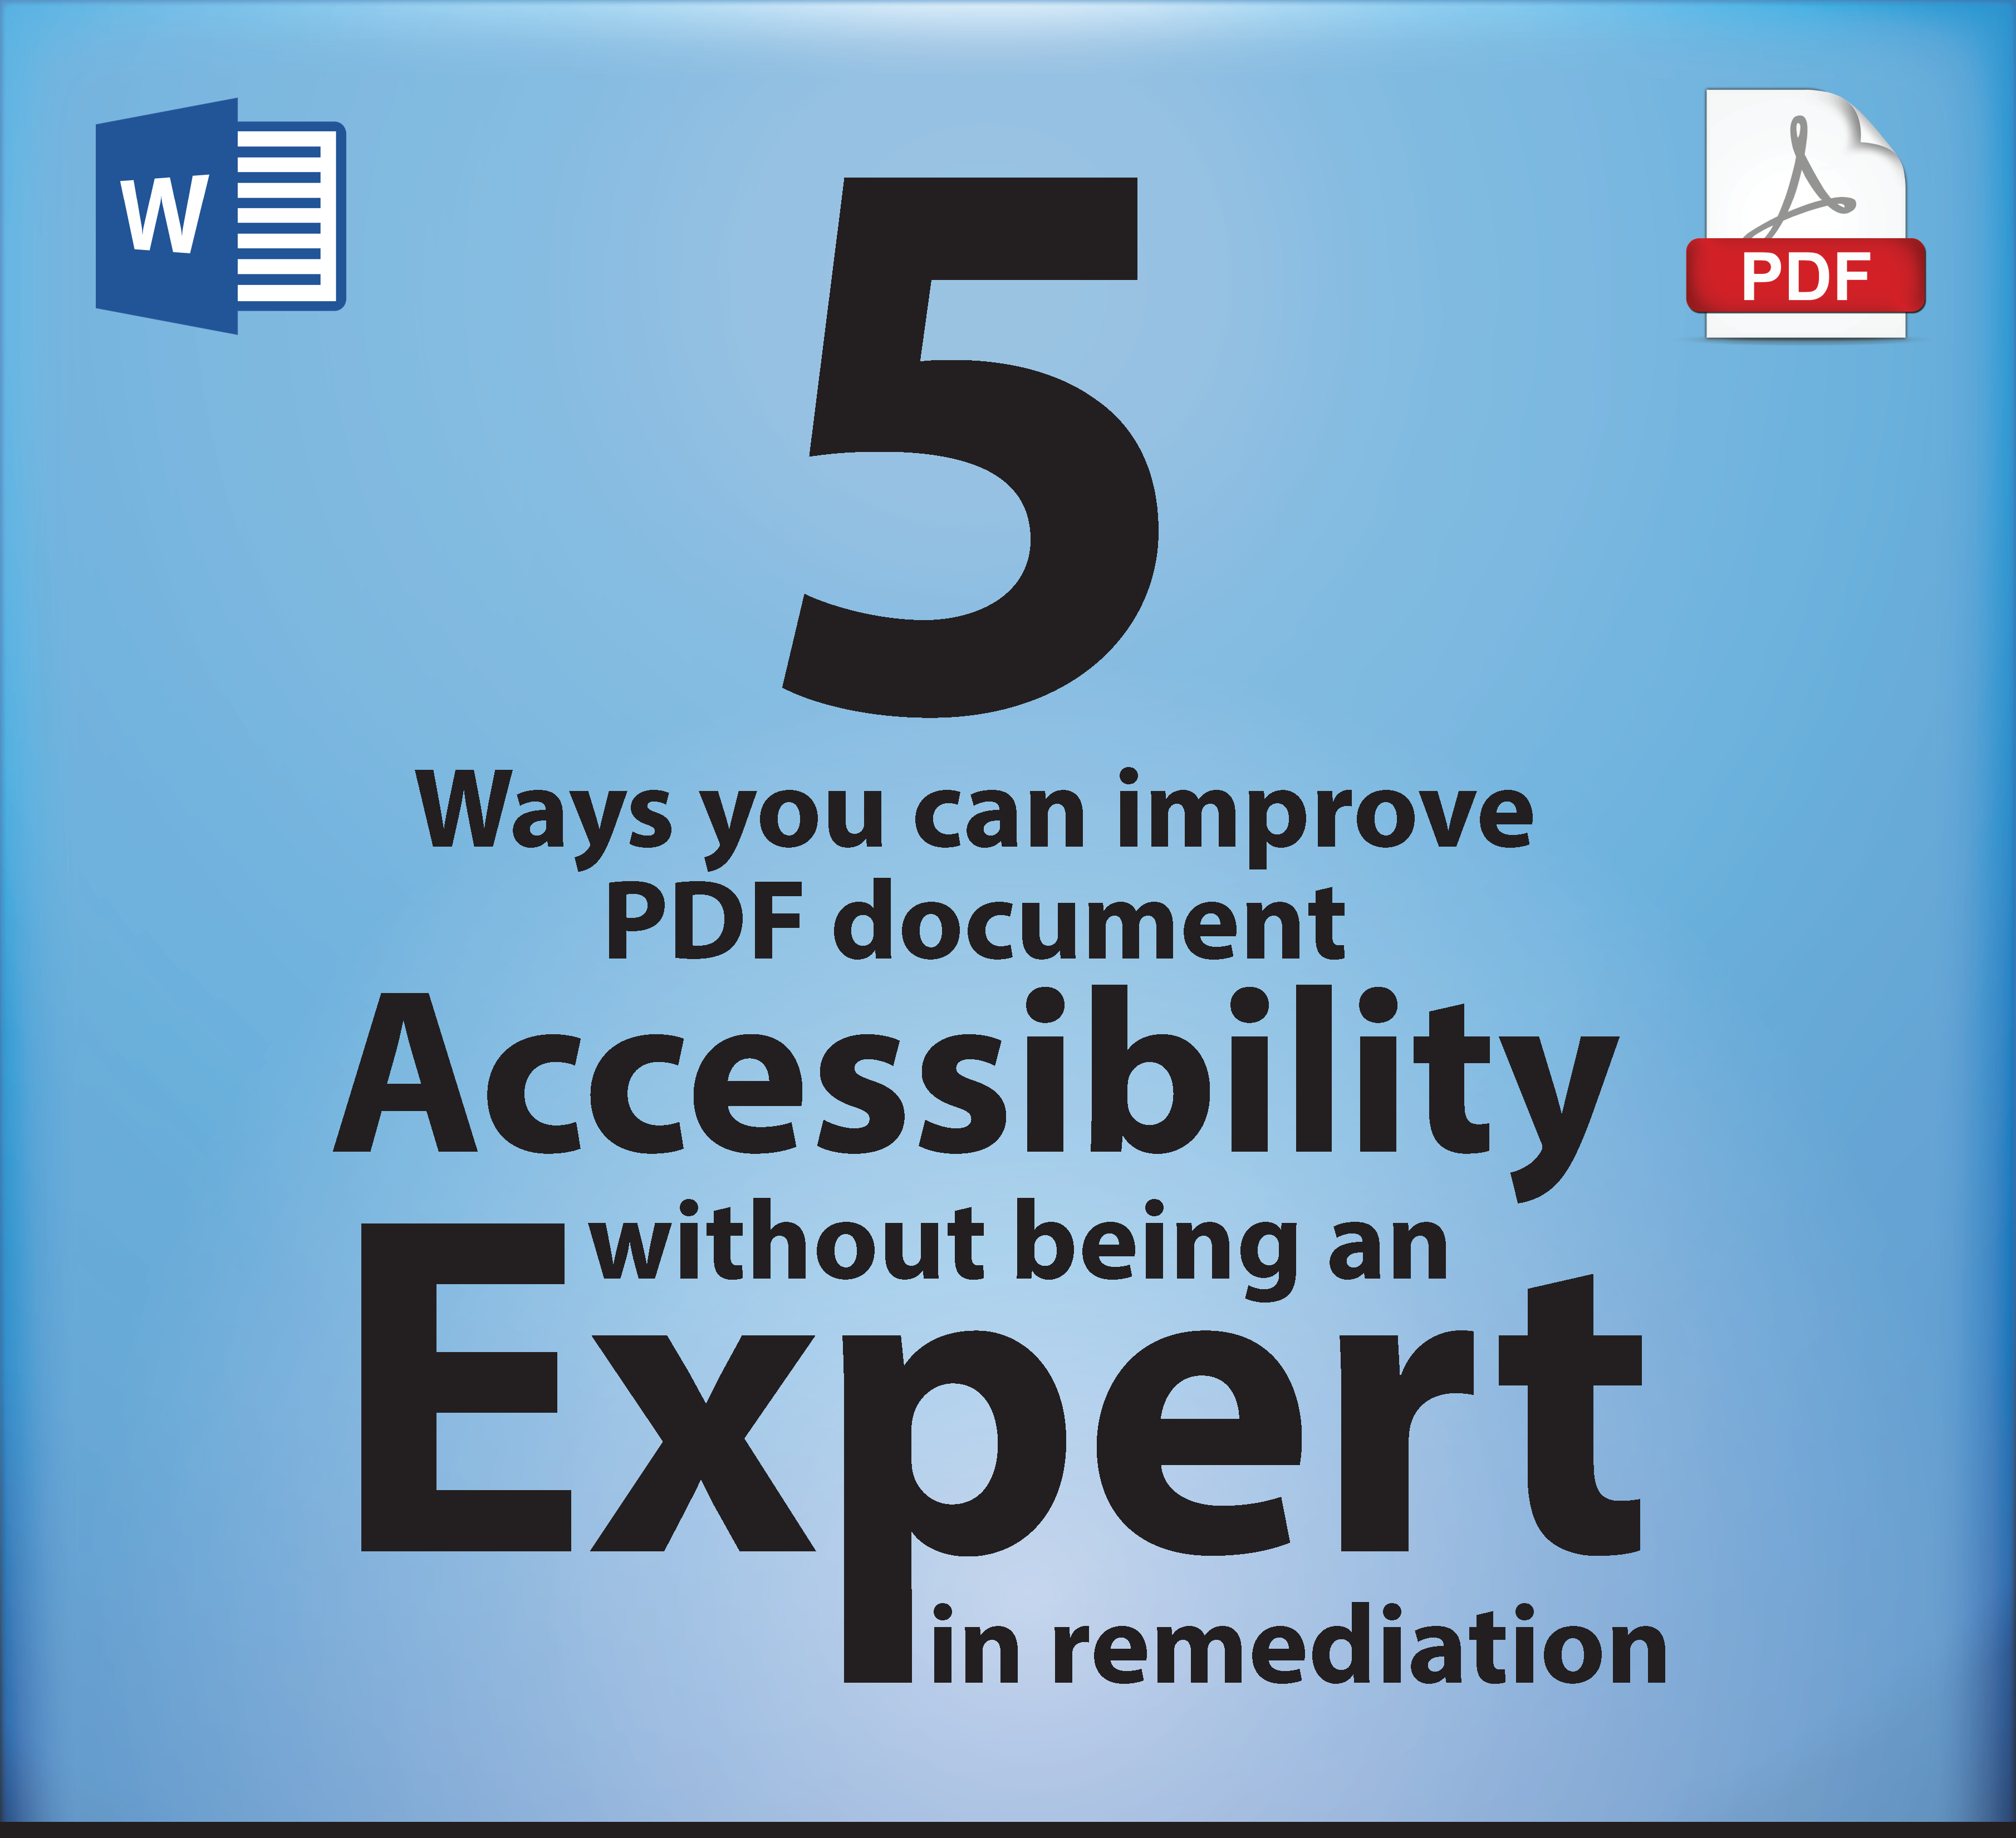 5 ways you can improve PDF document accessibility without being an expert in remediation.